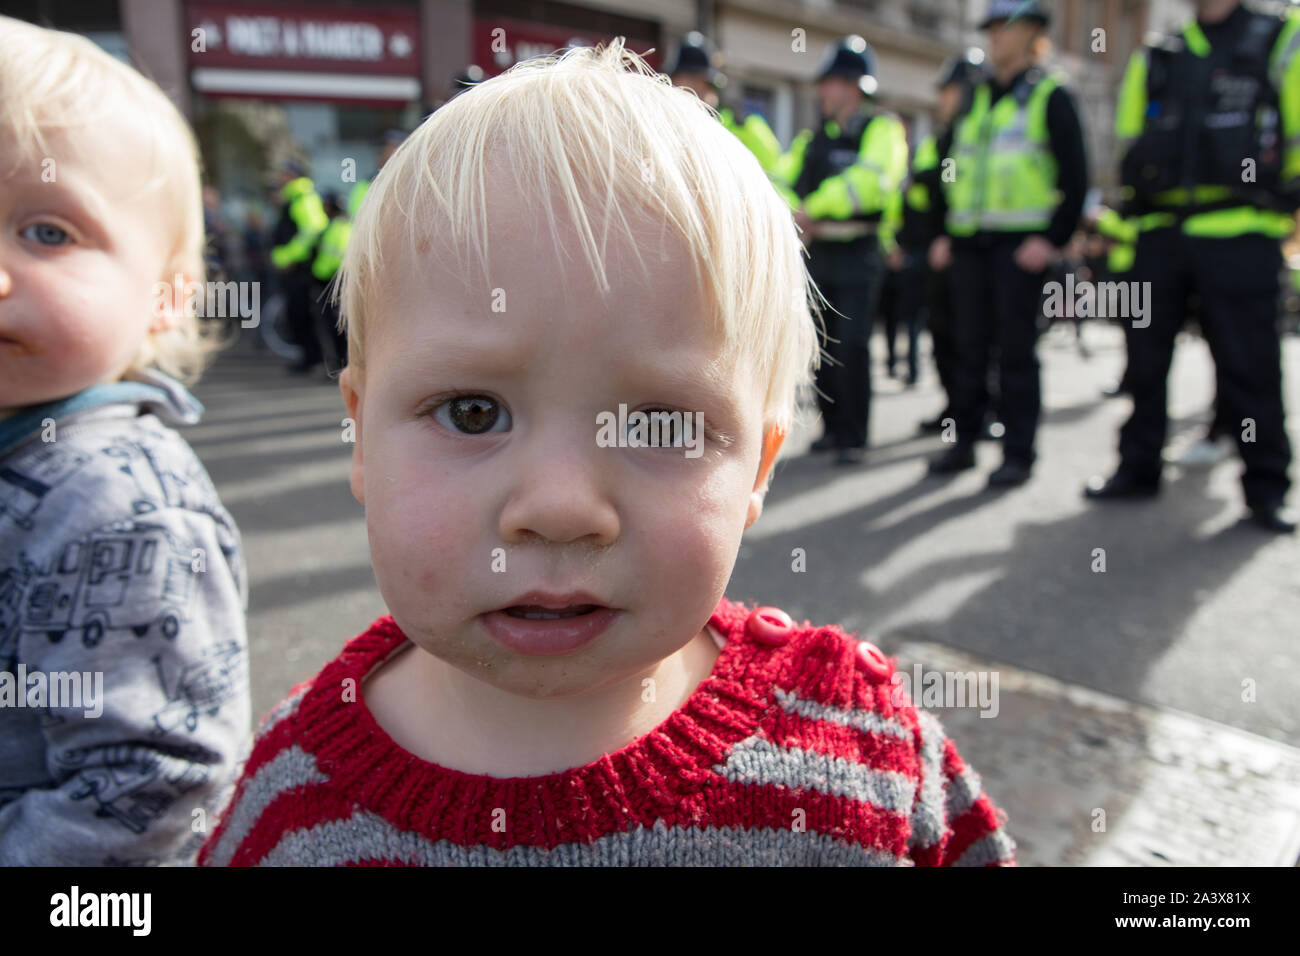 Westminster, London, UK. 10 October 2019. Environmental campaigners Extinction Rebellion have started two weeks protests from 7th to 20th October in and around London to demonstrate against climate change. The protesters in Trafalgar Square demand decisive action from the UK Government on the global environmental crisis. Stock Photo